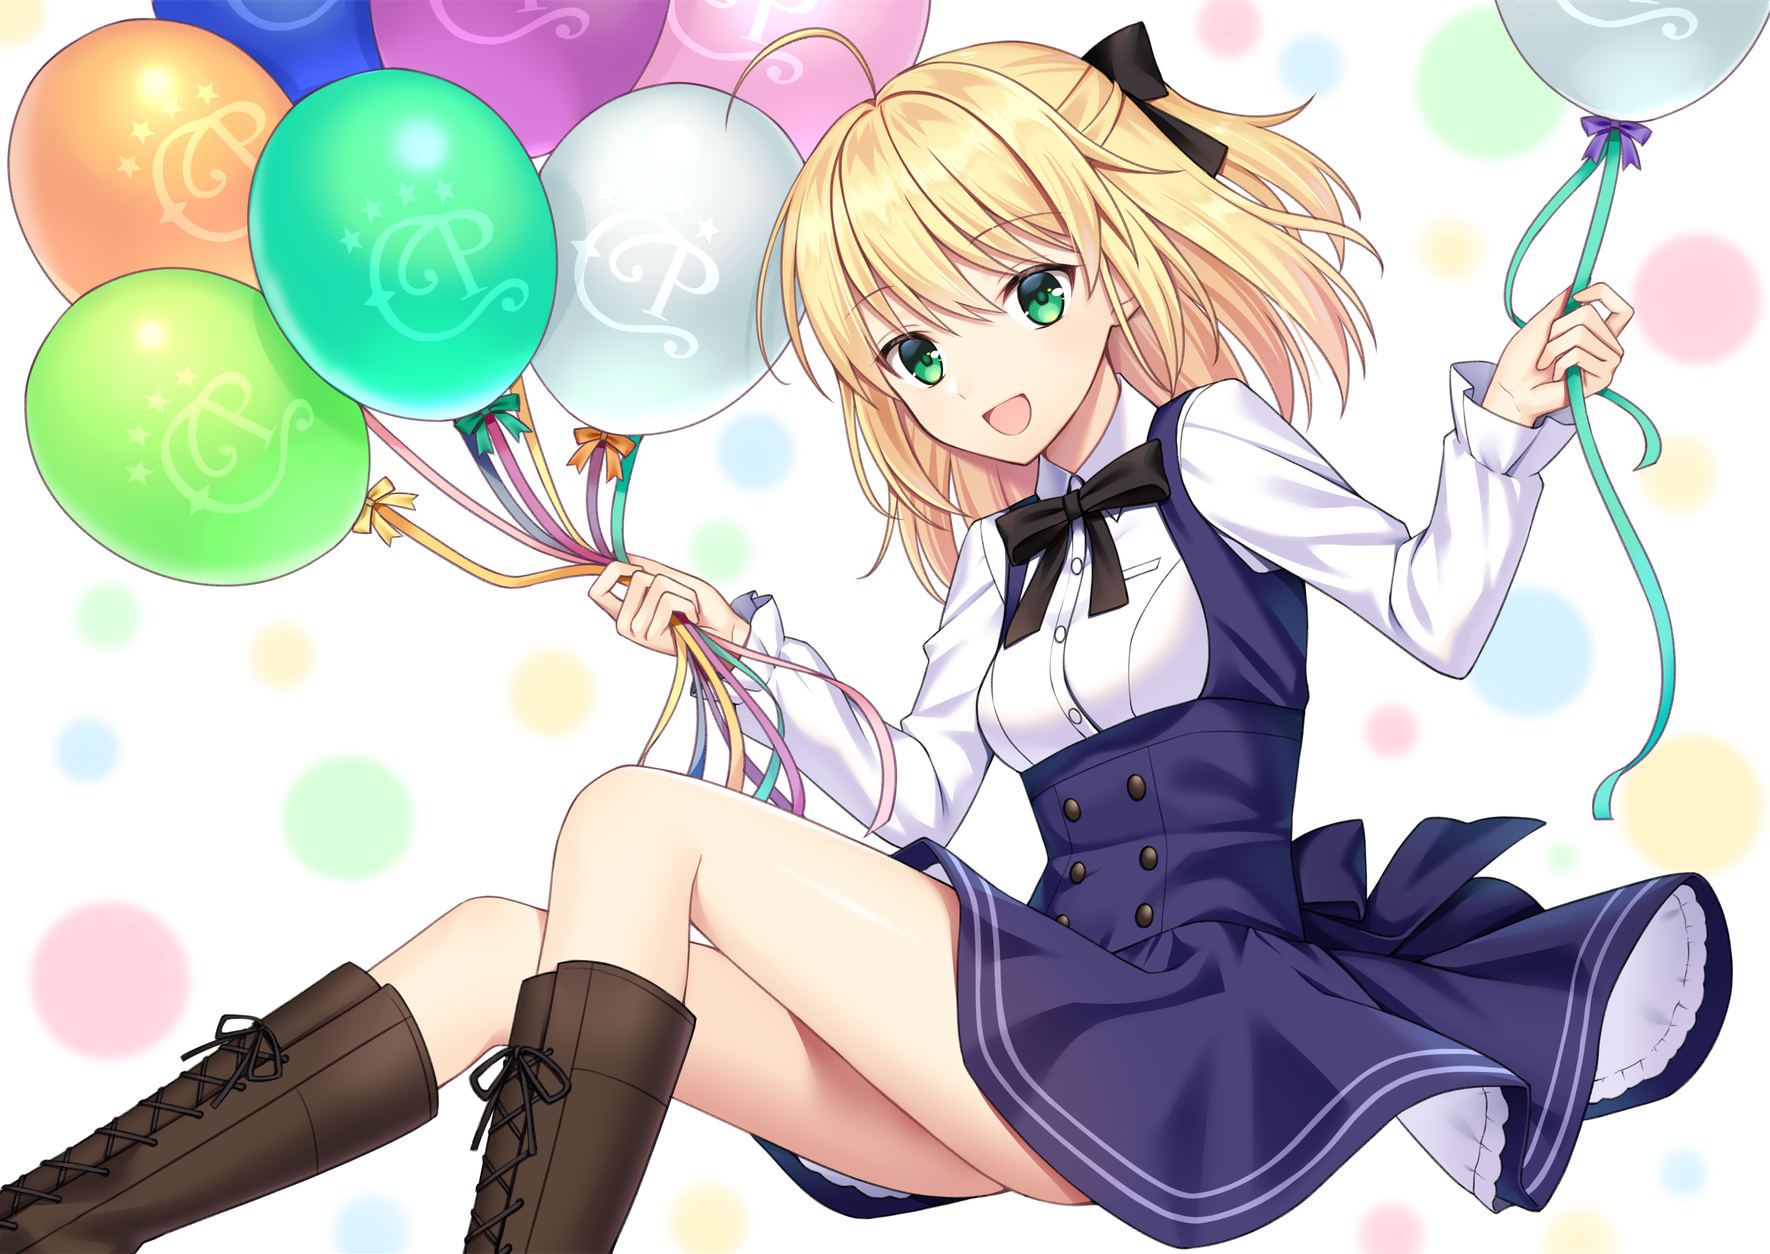 Anime 1770x1254 anime anime girls blonde Fate series Fate/Unlimited Codes  Fate/Grand Order Artoria Pendragon Saber Lily